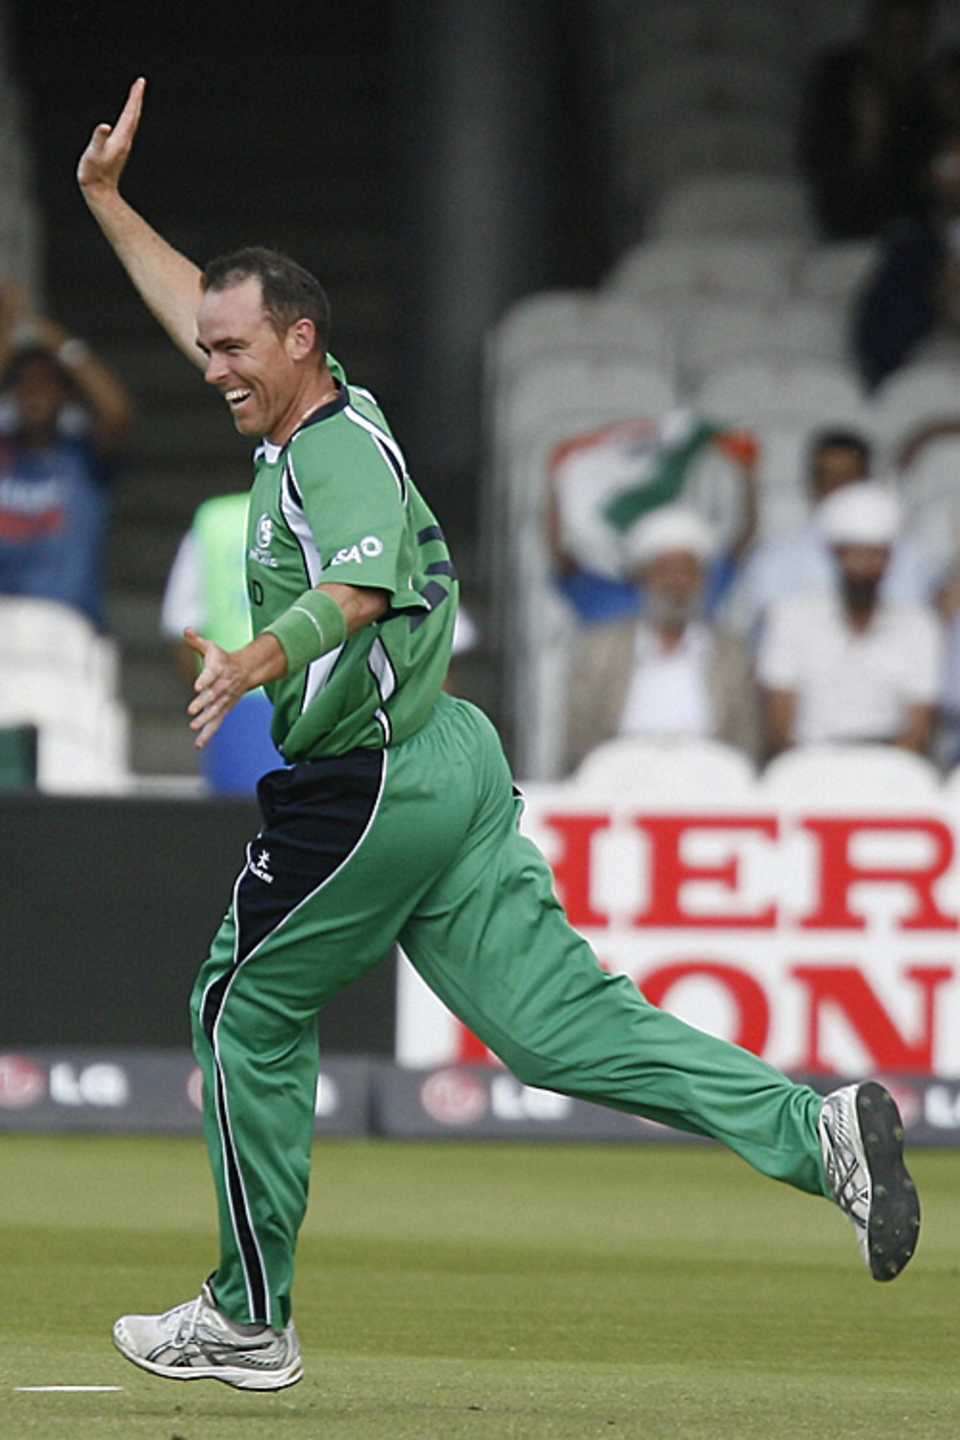 Trent Johnston celebrates the run-out of Ryan ten Doeschate in a thrilling Super Over finish to Ireland's match against Netherlands